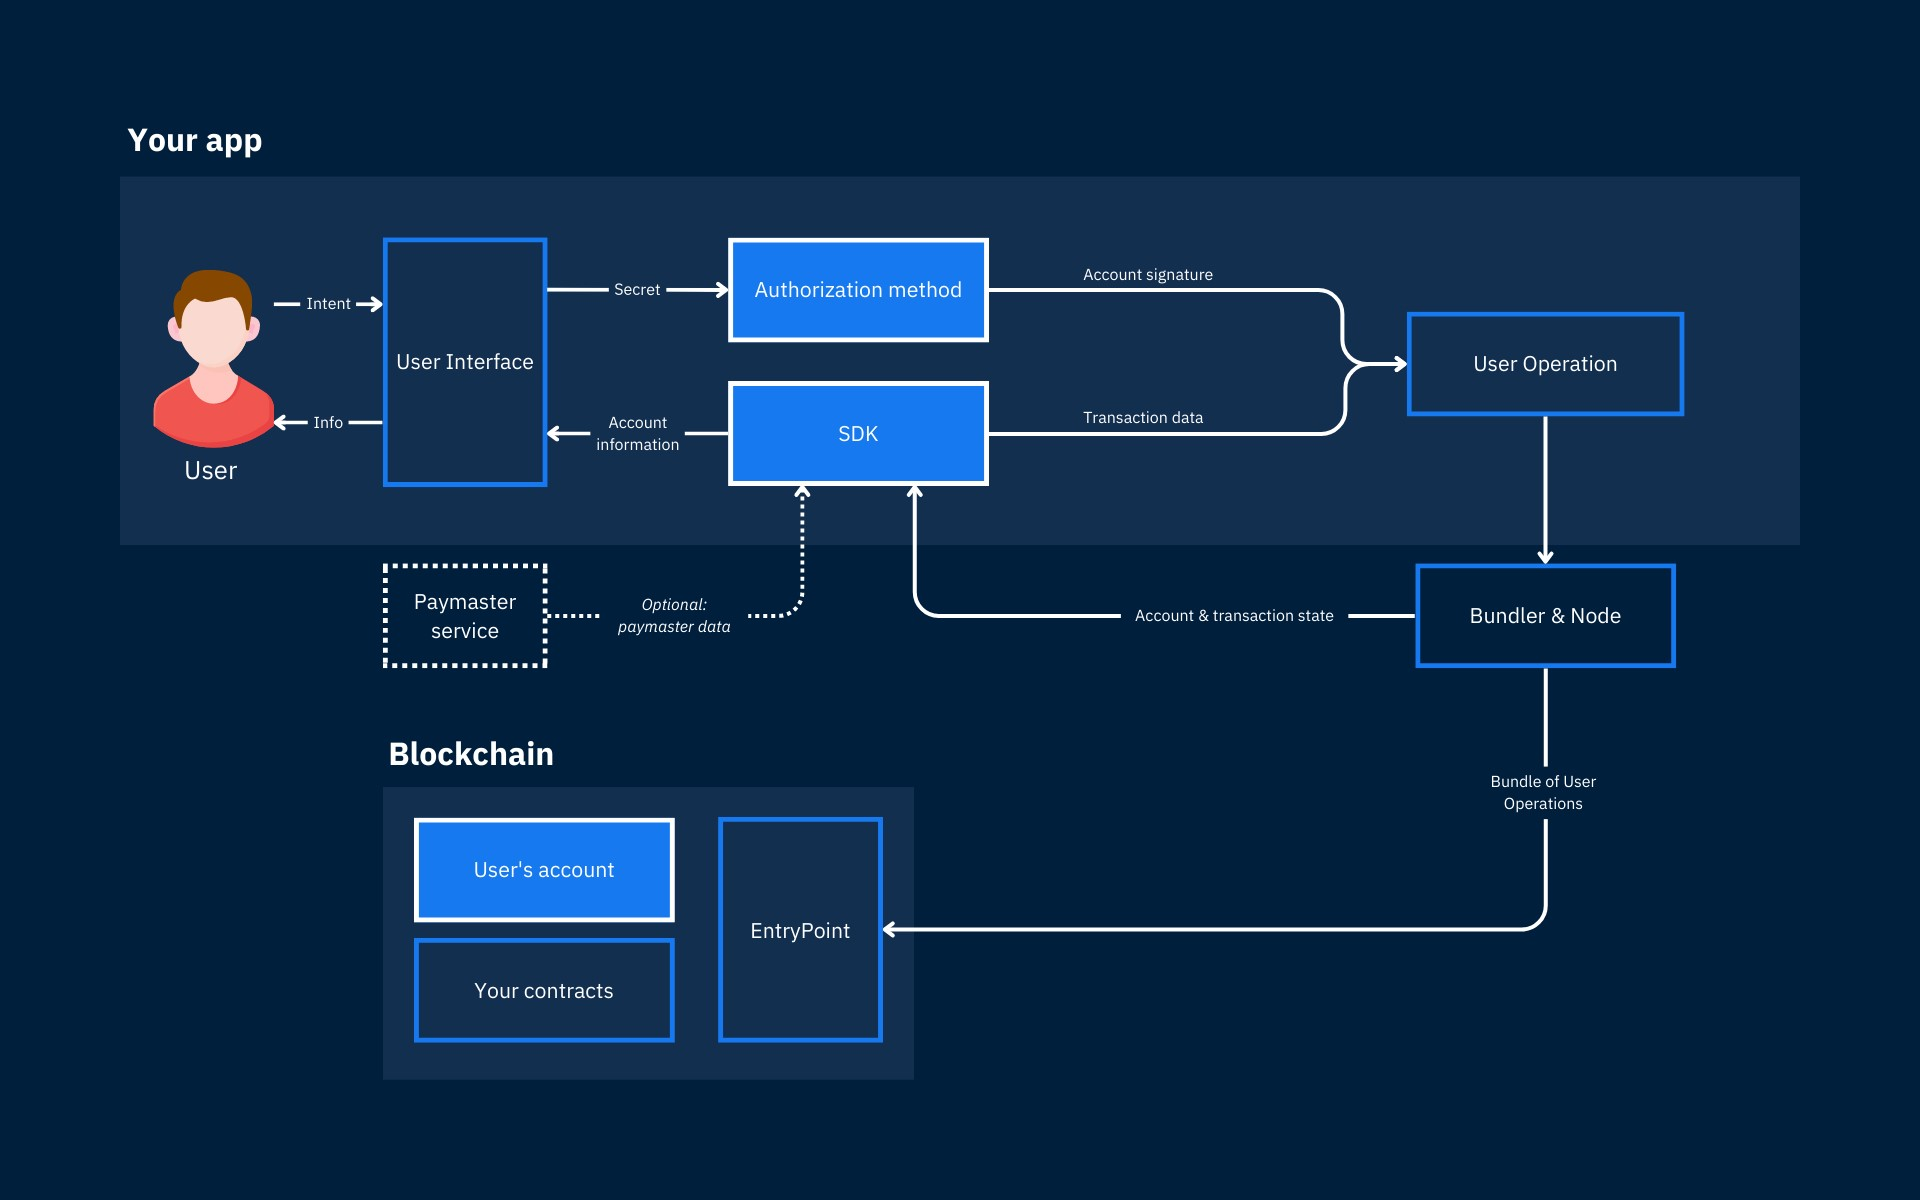 High-level interactions between an application and the blockchain. Blue boxes indicate decisions, and dashed lines are optional.